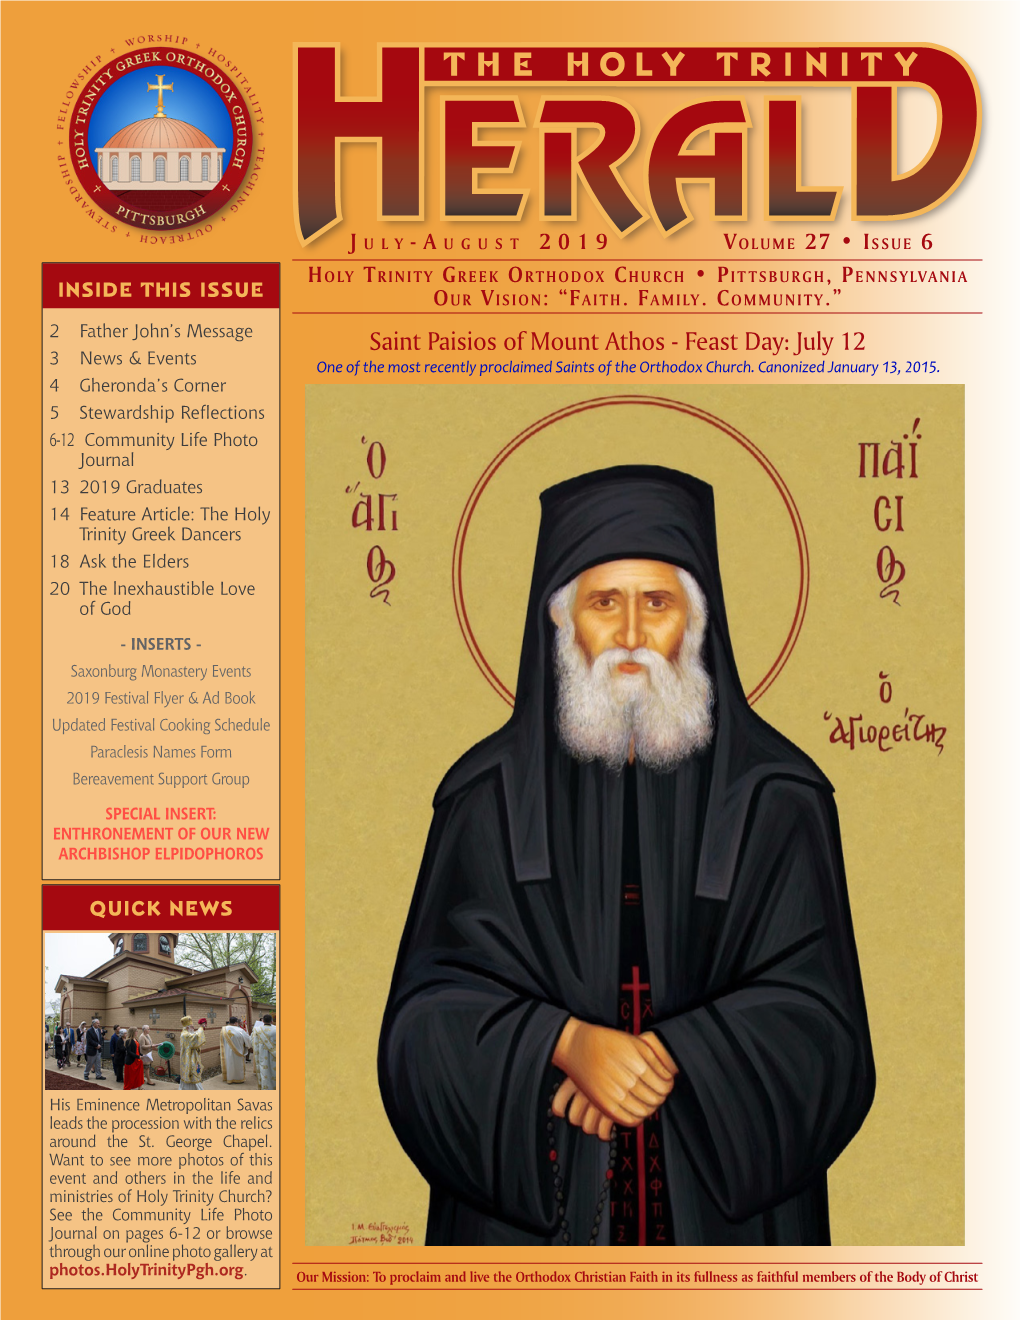 Saint Paisios of Mount Athos - Feast Day: July 12 3 News & Events One of the Most Recently Proclaimed Saints of the Orthodox Church